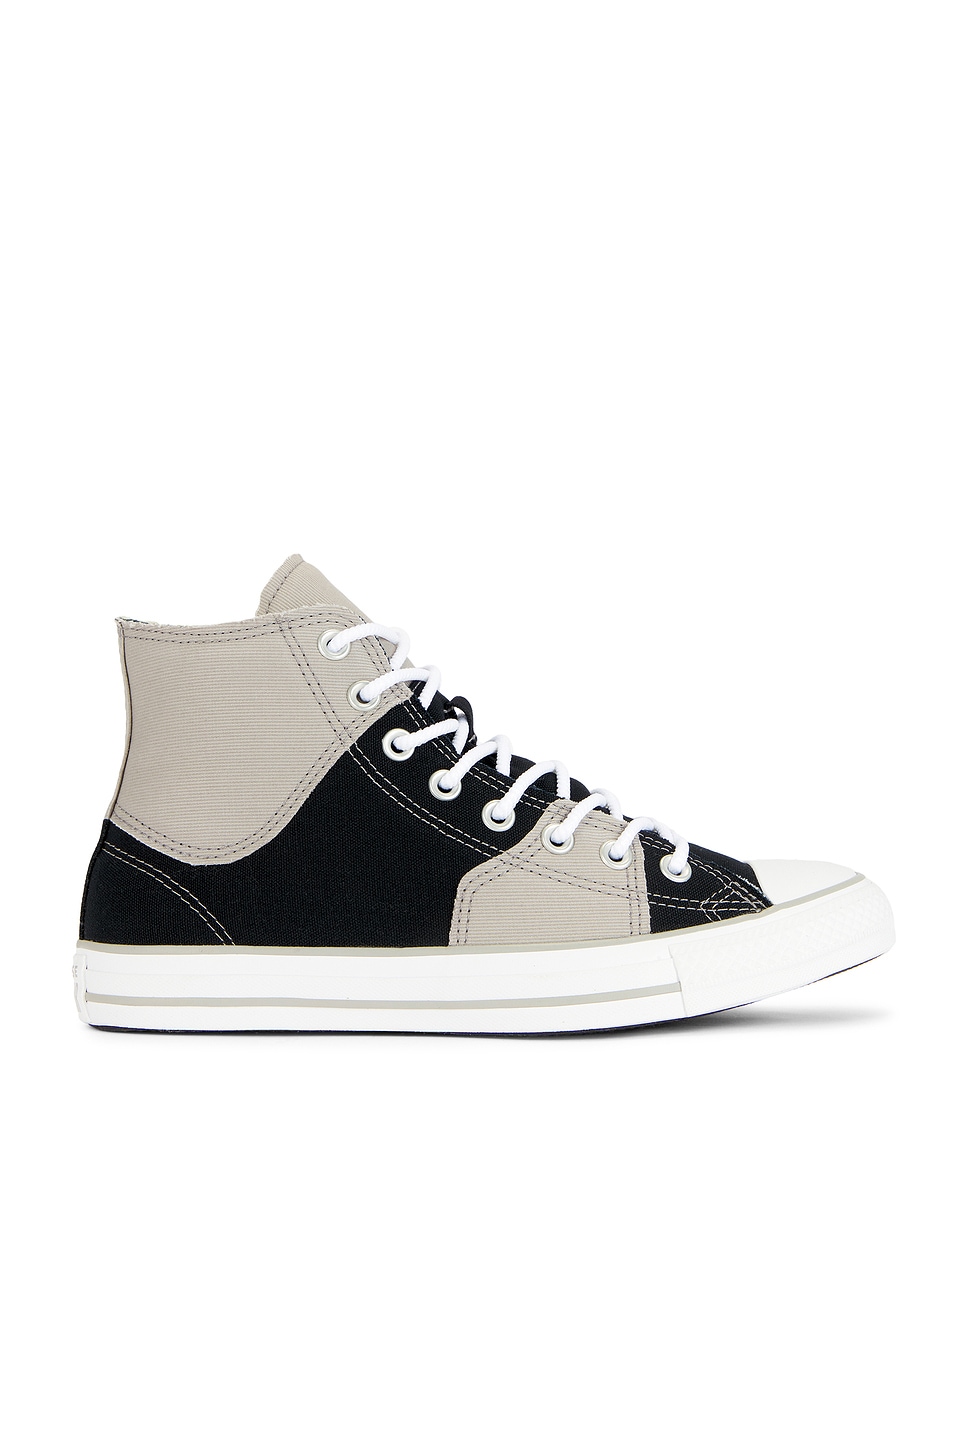 Image 1 of Converse Chuck Taylor All Star Court in Totally Neutral, Black, & White